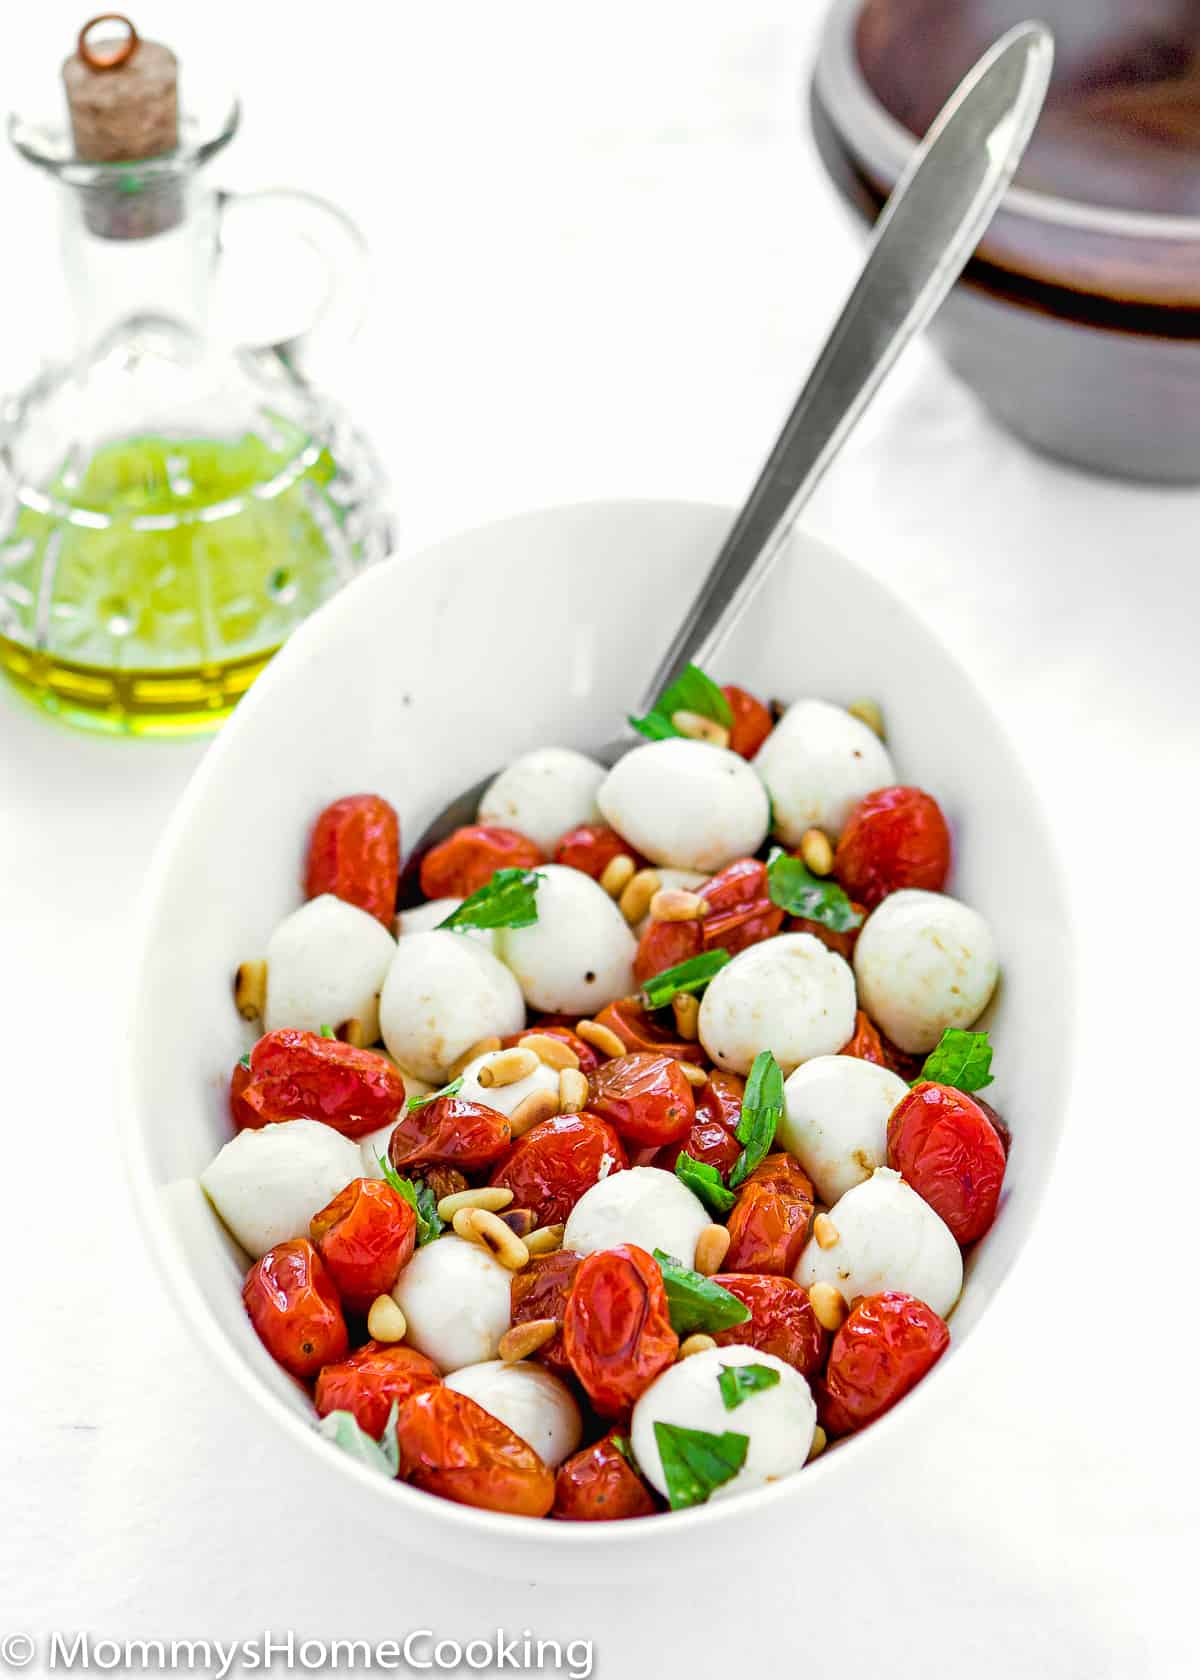 ROASTED TOMATO CAPRESE SALAD over a white surface with a bottle of olive oil in the background